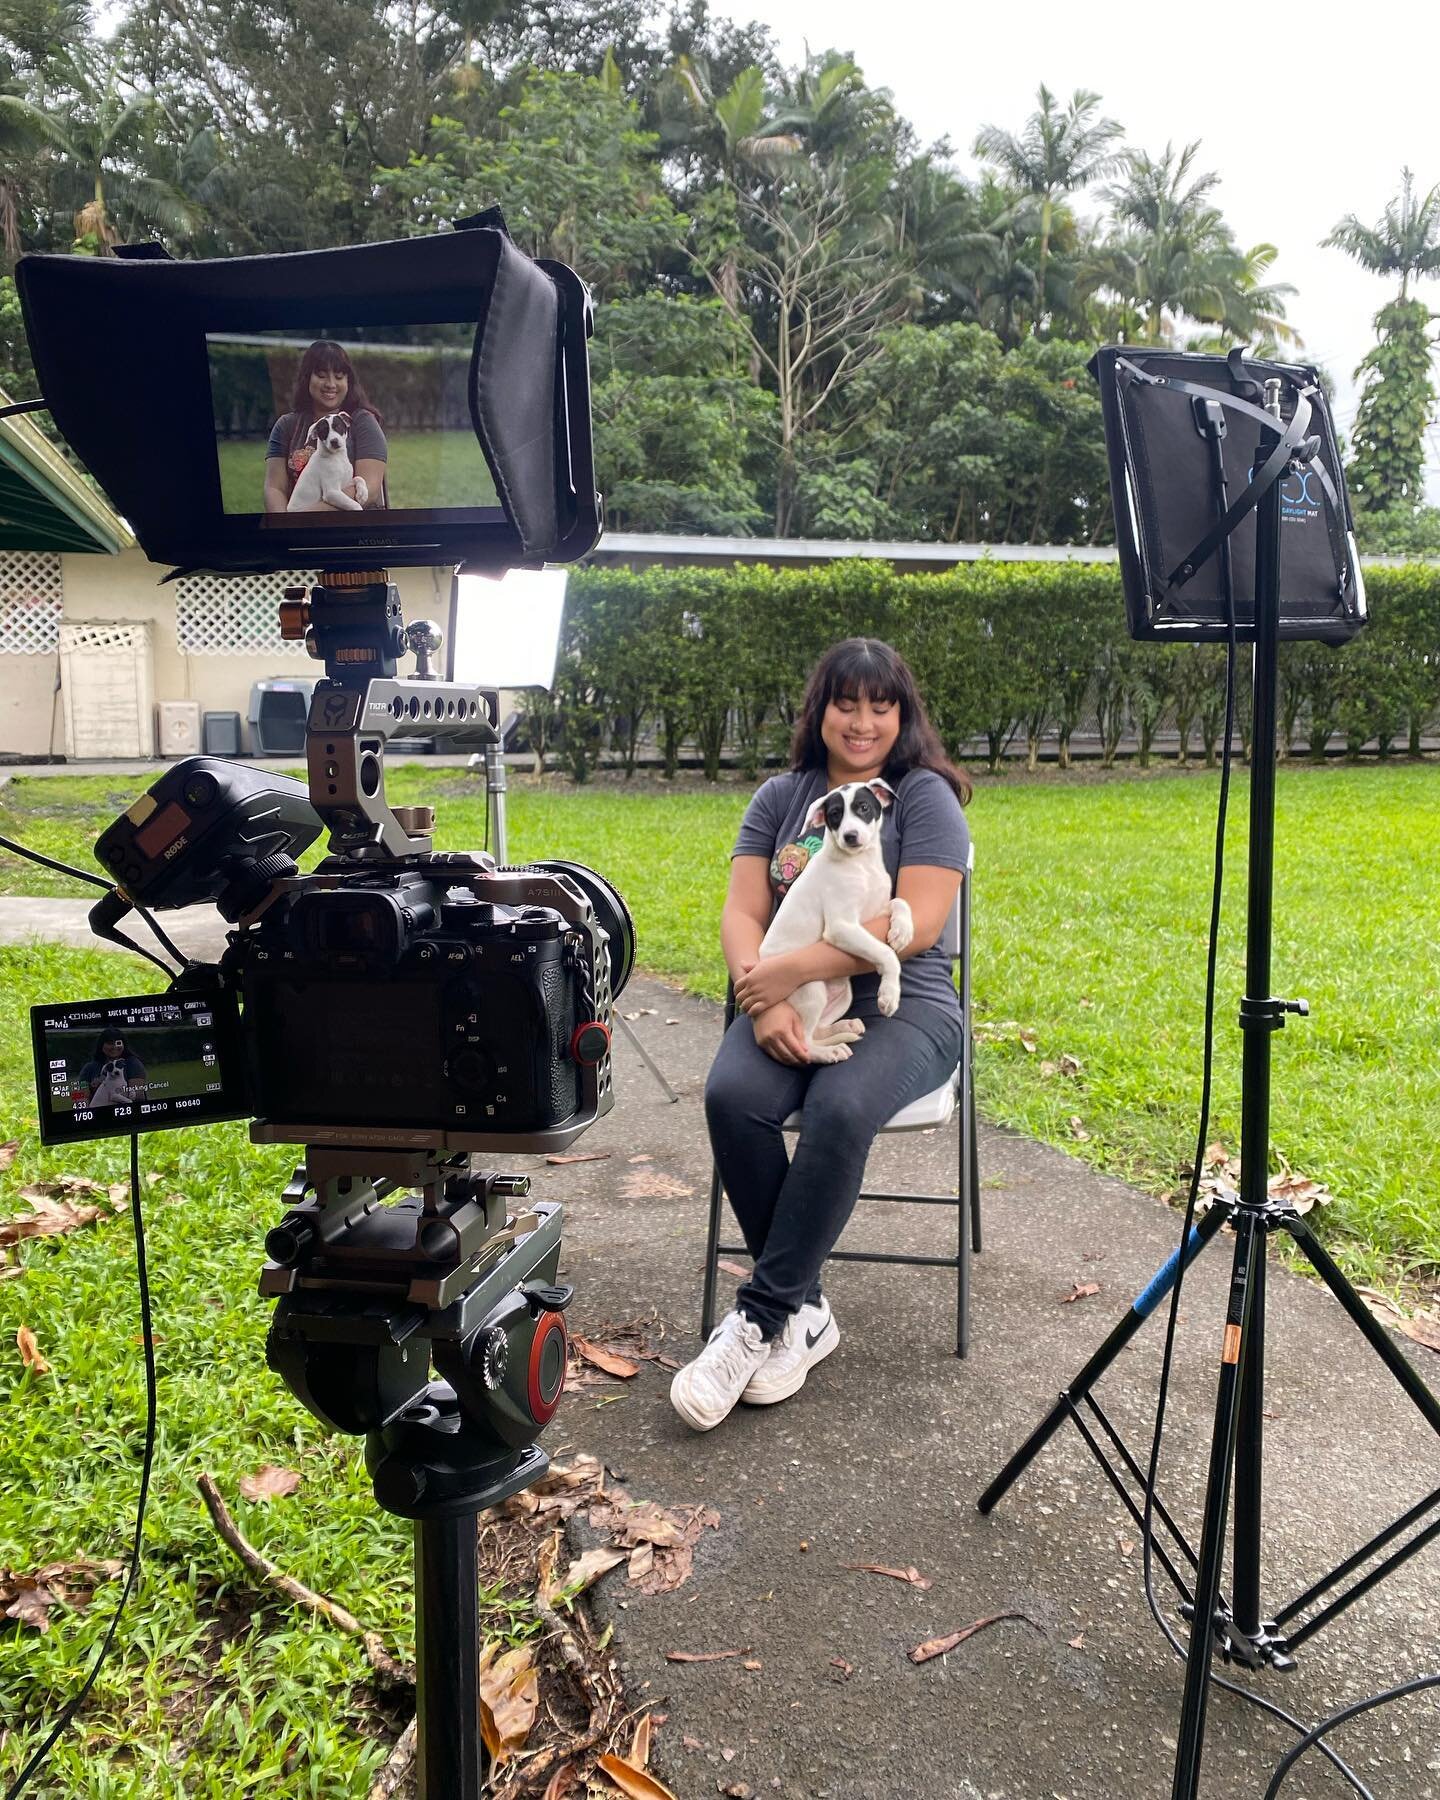 A few behind-the-scenes shots from our @hawaiiislandhumanesociety shoot. We&rsquo;re hard at work in post-production now preparing the edit for their upcoming fundraiser. We nearly came home with a new large dog and a 3 legged cat. After some reflect